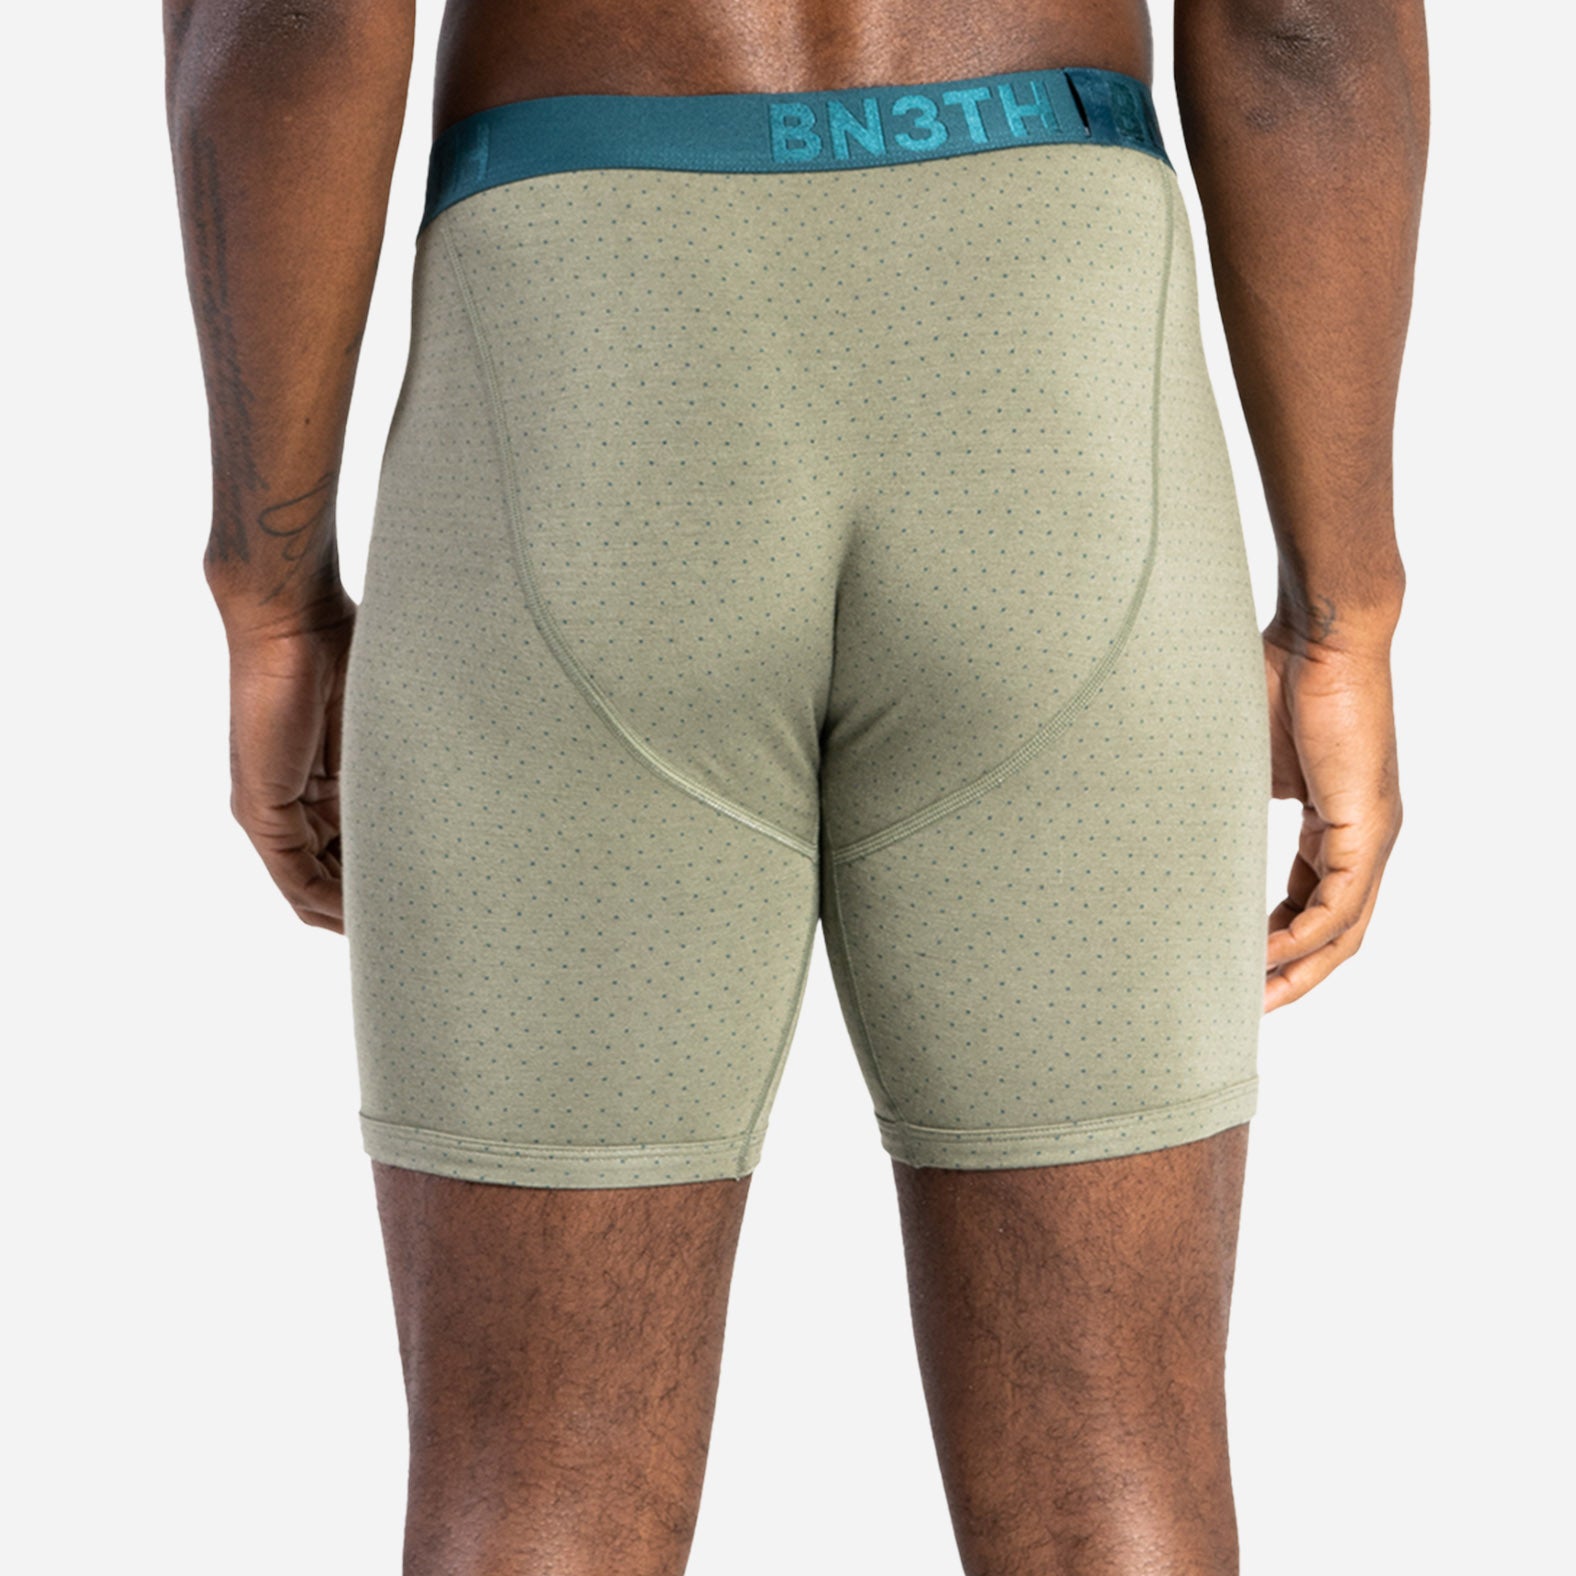 CLASSIC BOXER BRIEF WITH FLY: MICRO DOT PINE